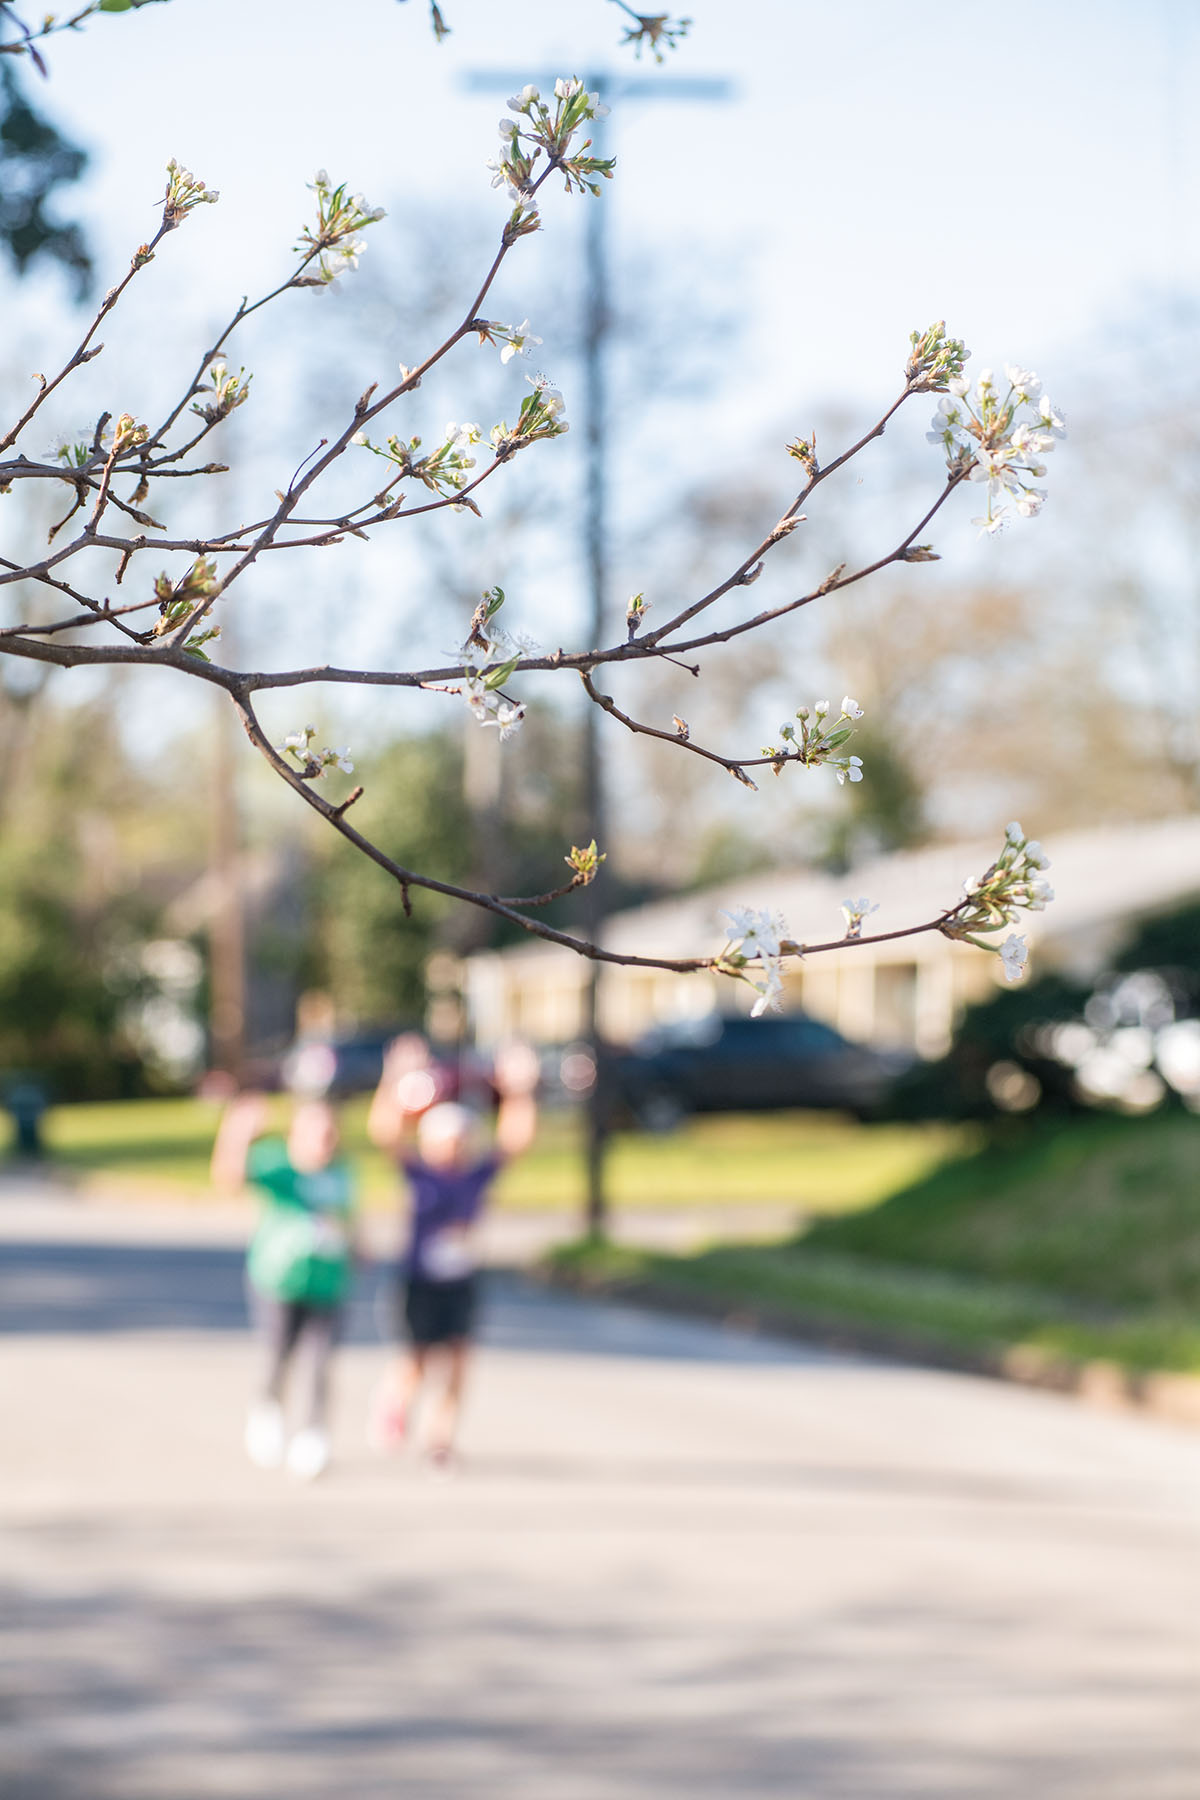 A blooming tree is in the foreground of a pair of runners on a street in a serene setting